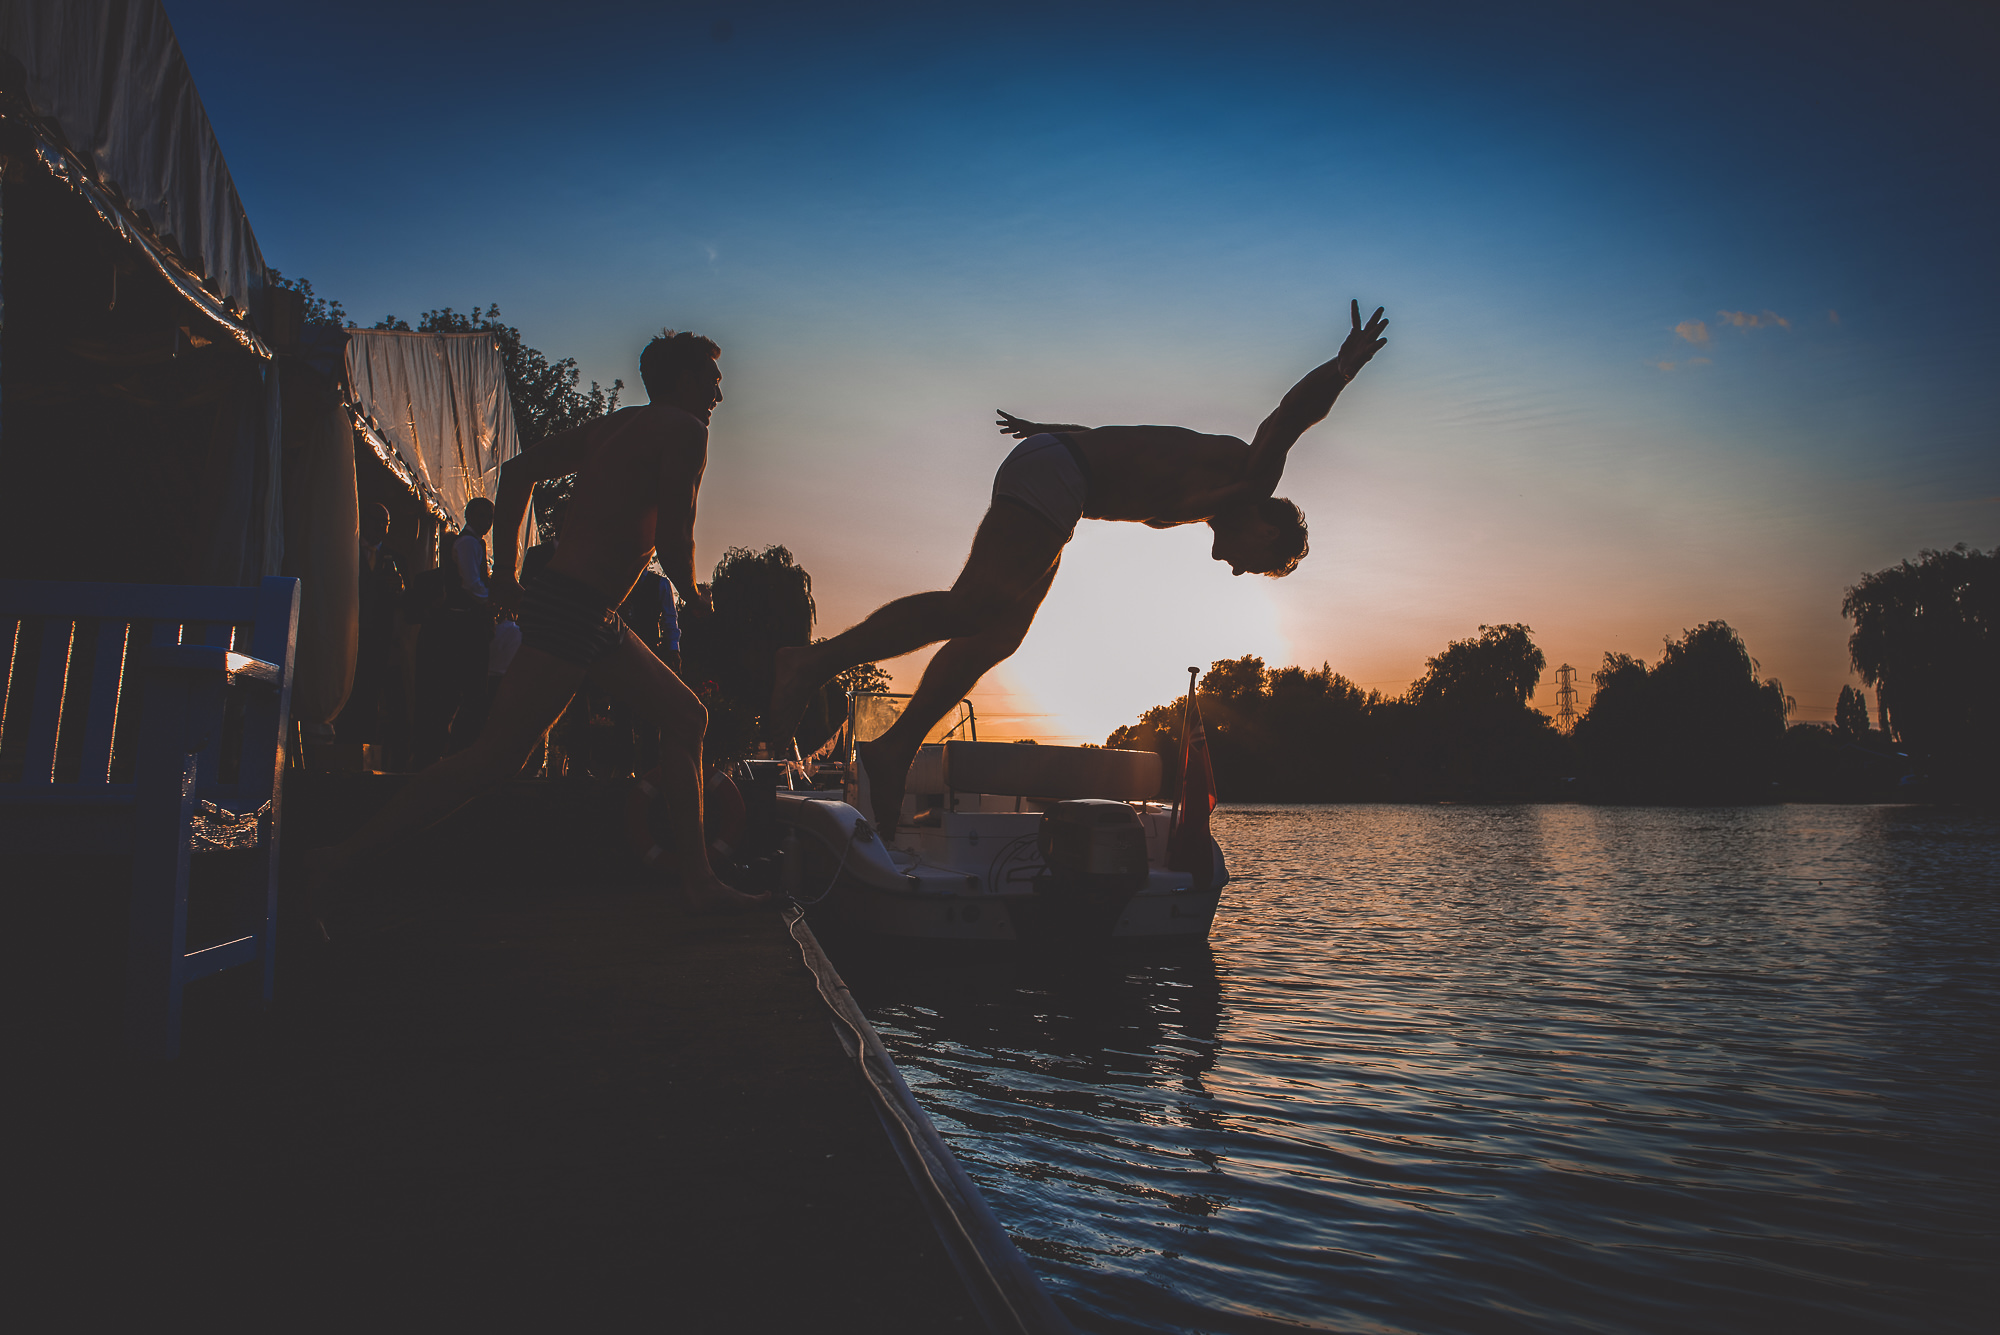 A groom jumping off a dock into a body of water.